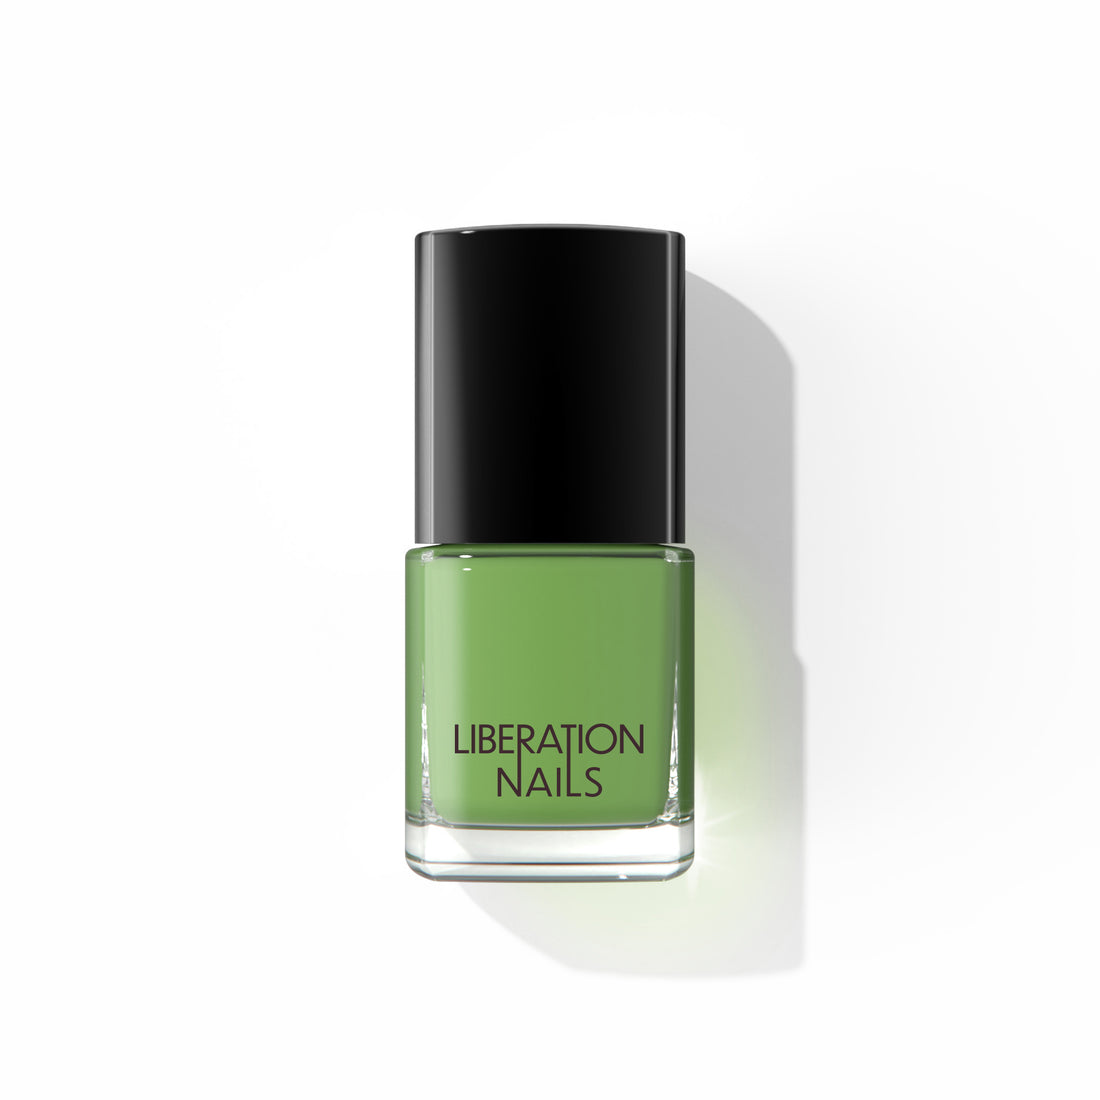 A bottle of Liberation Nails non-toxic nail polish in a cool, rich green color, Earth Sign.